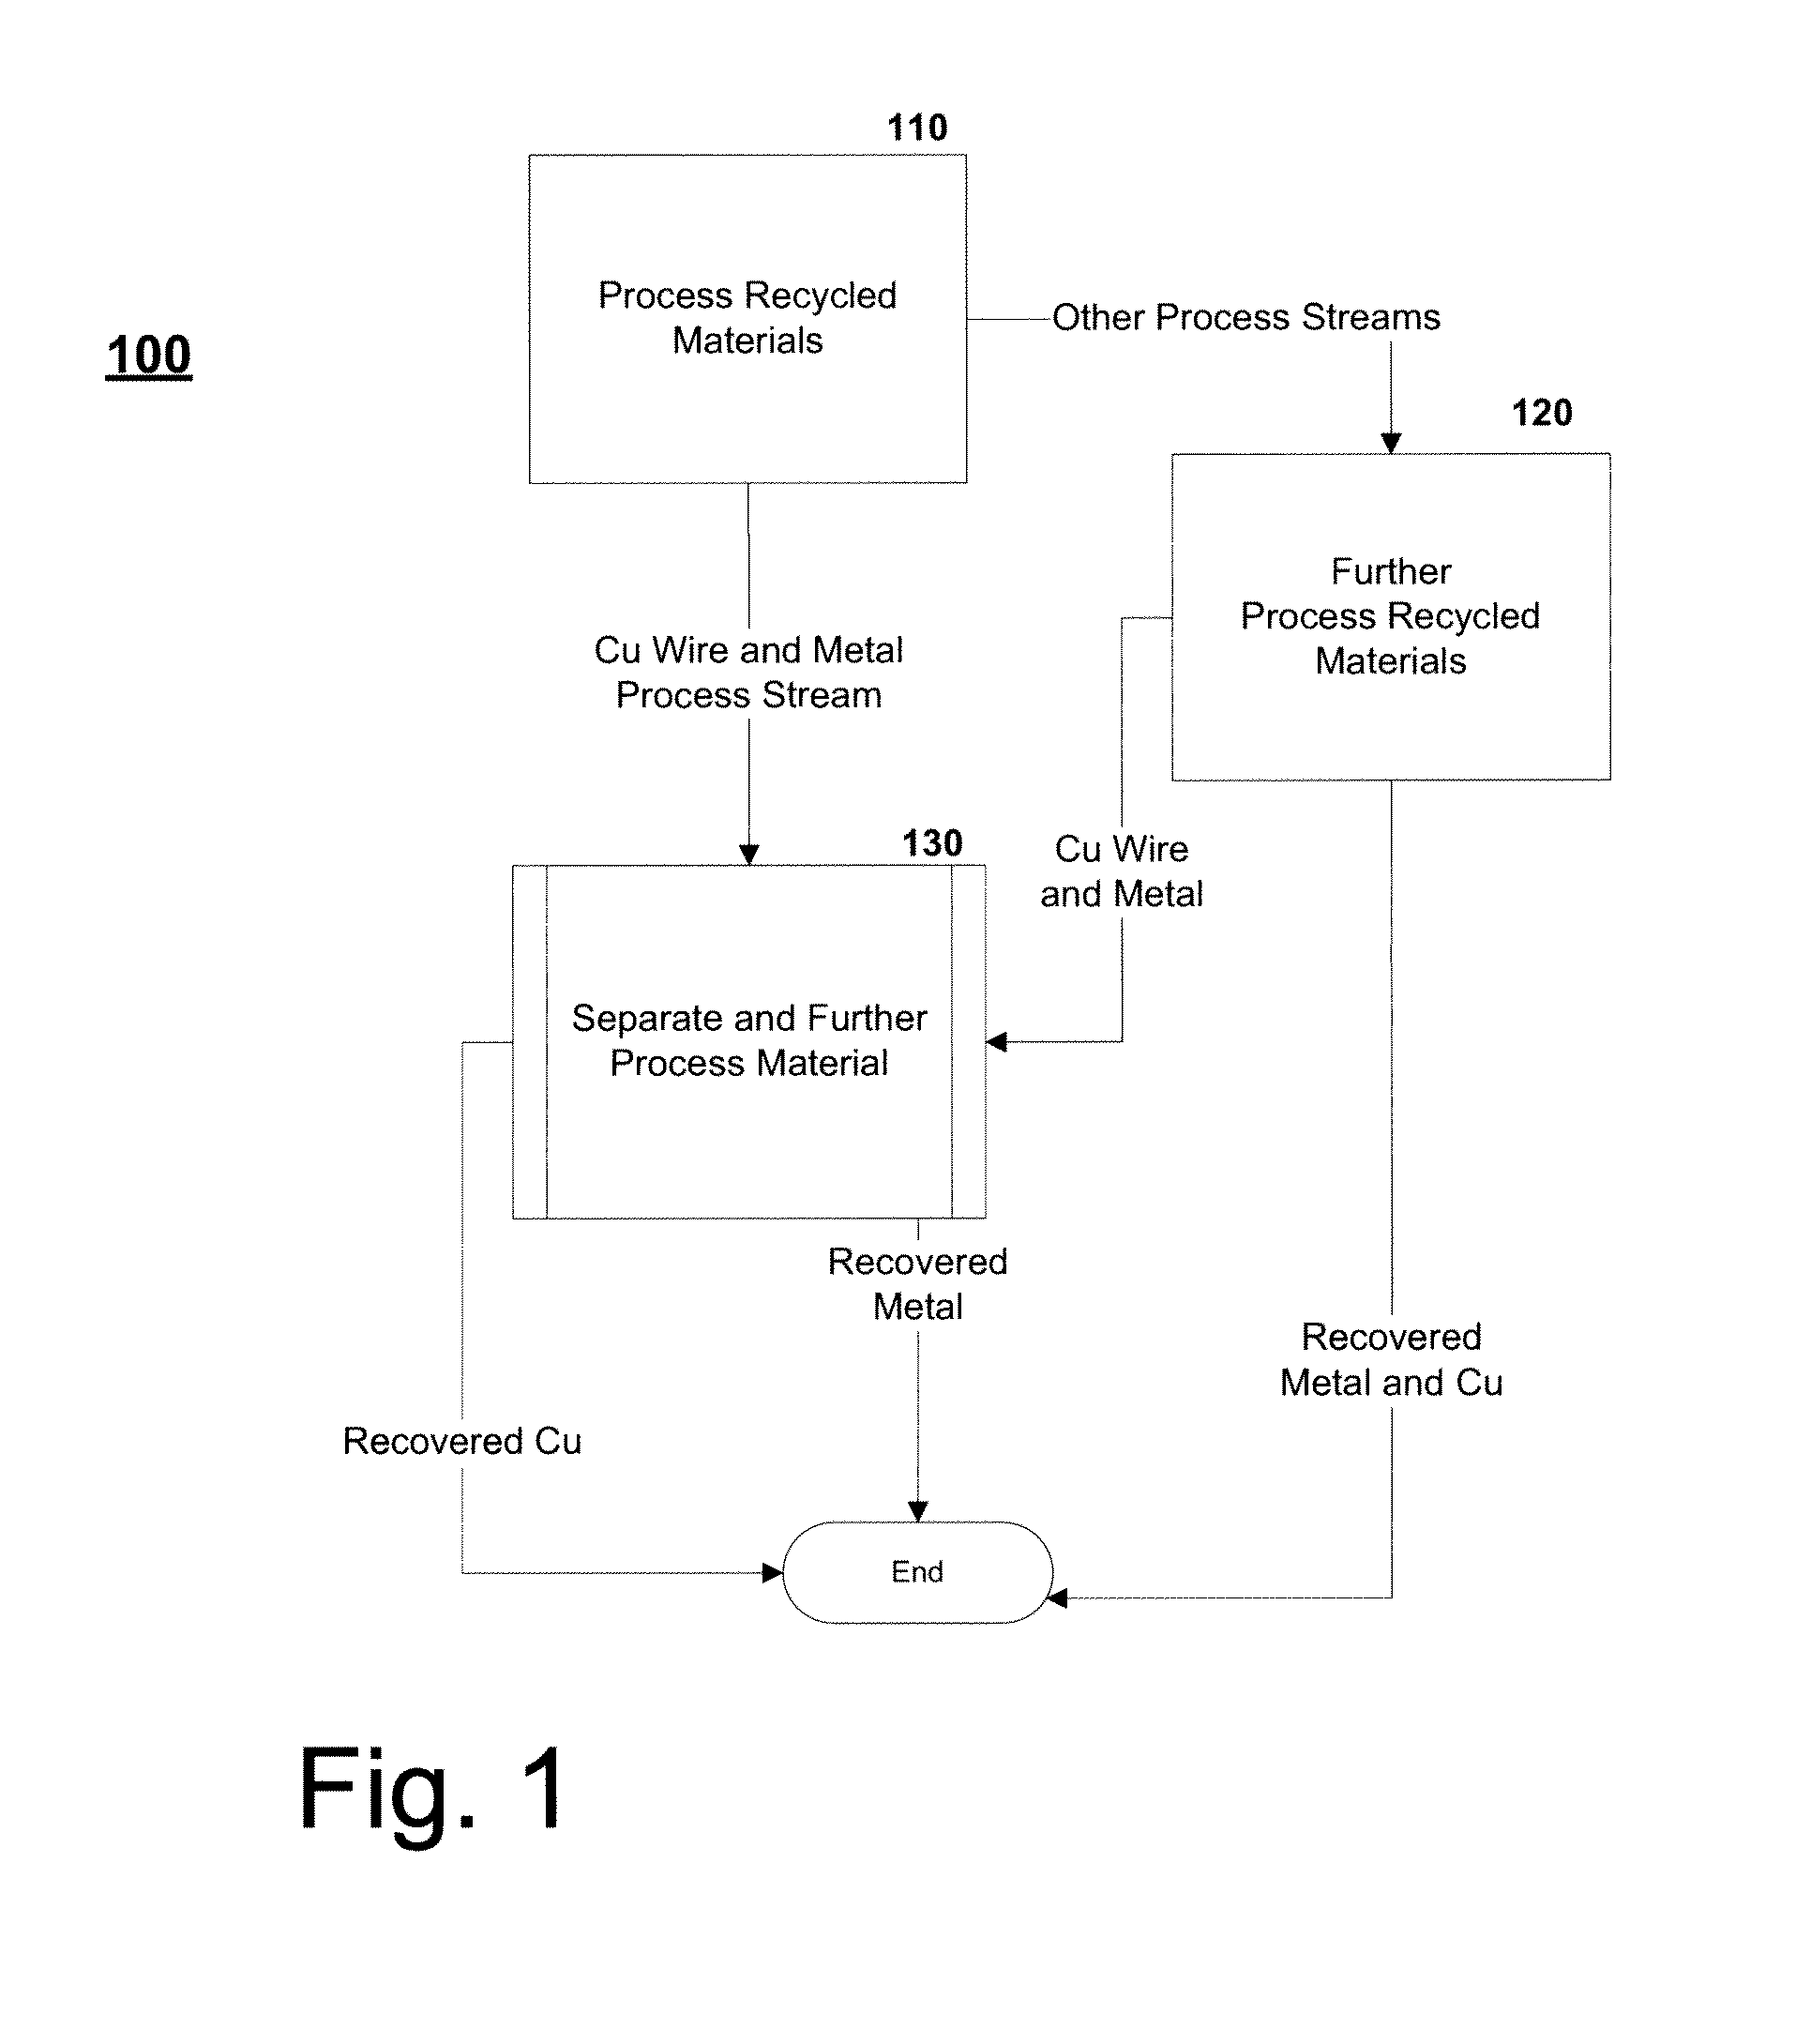 Method and System for Separating and Recovering Wire and Other Metal from Processed Recycled Materials